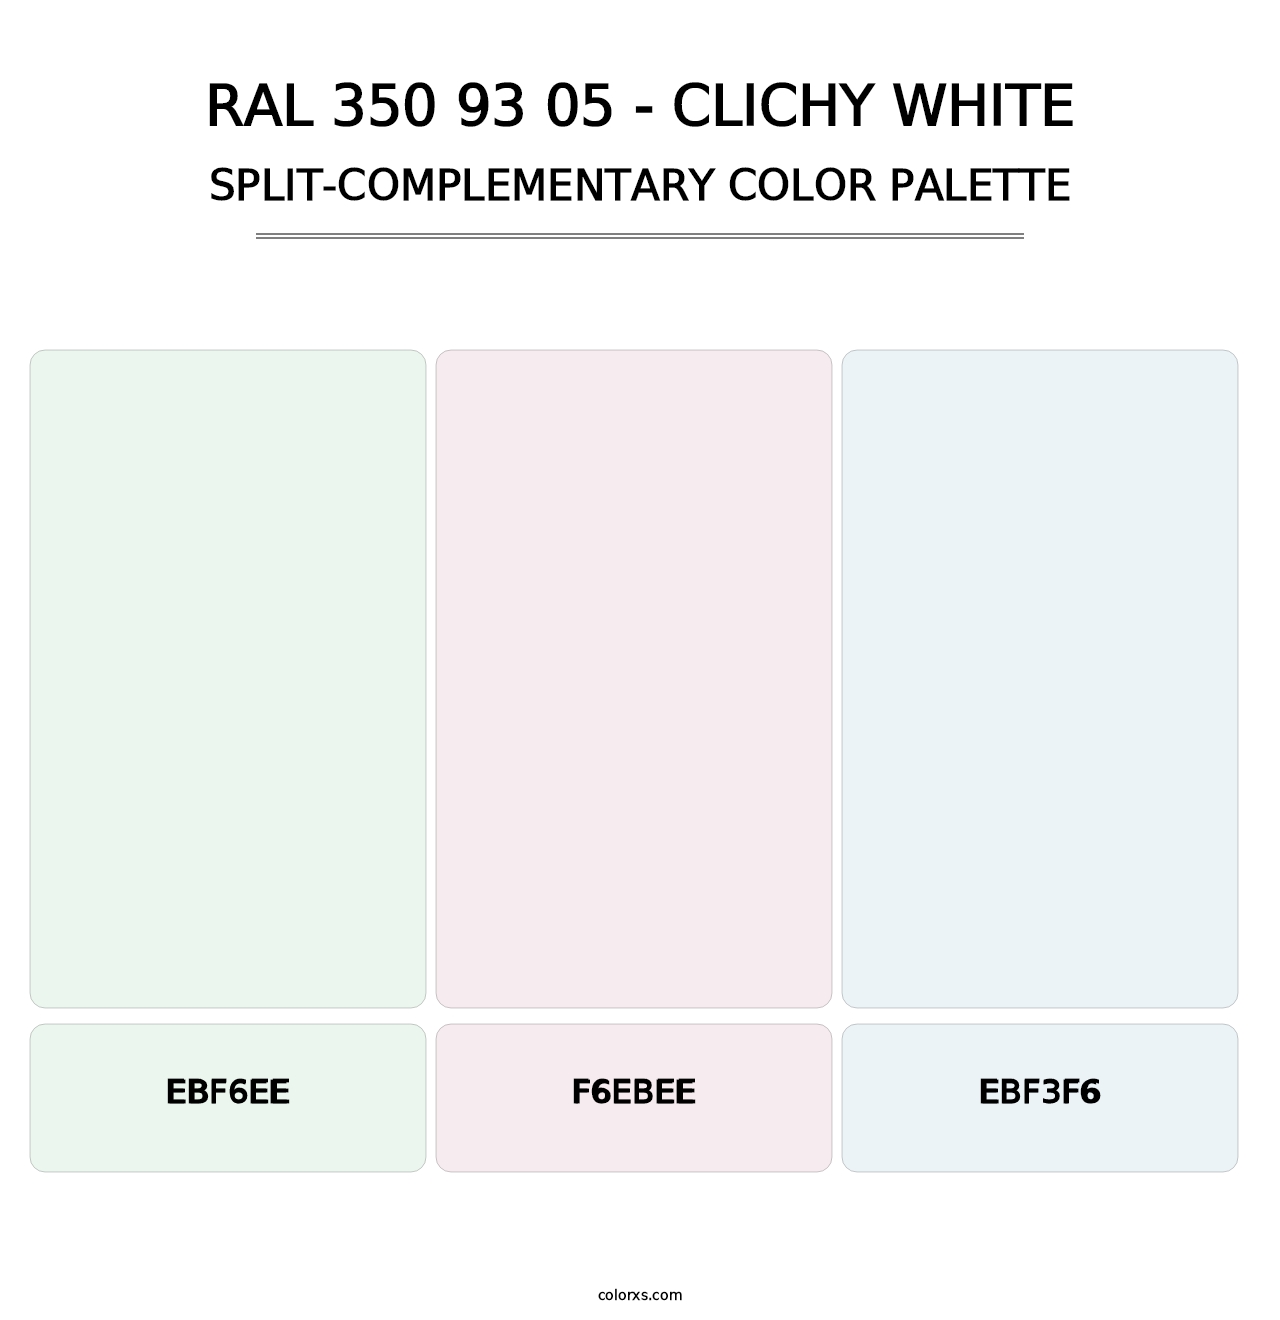 RAL 350 93 05 - Clichy White - Split-Complementary Color Palette